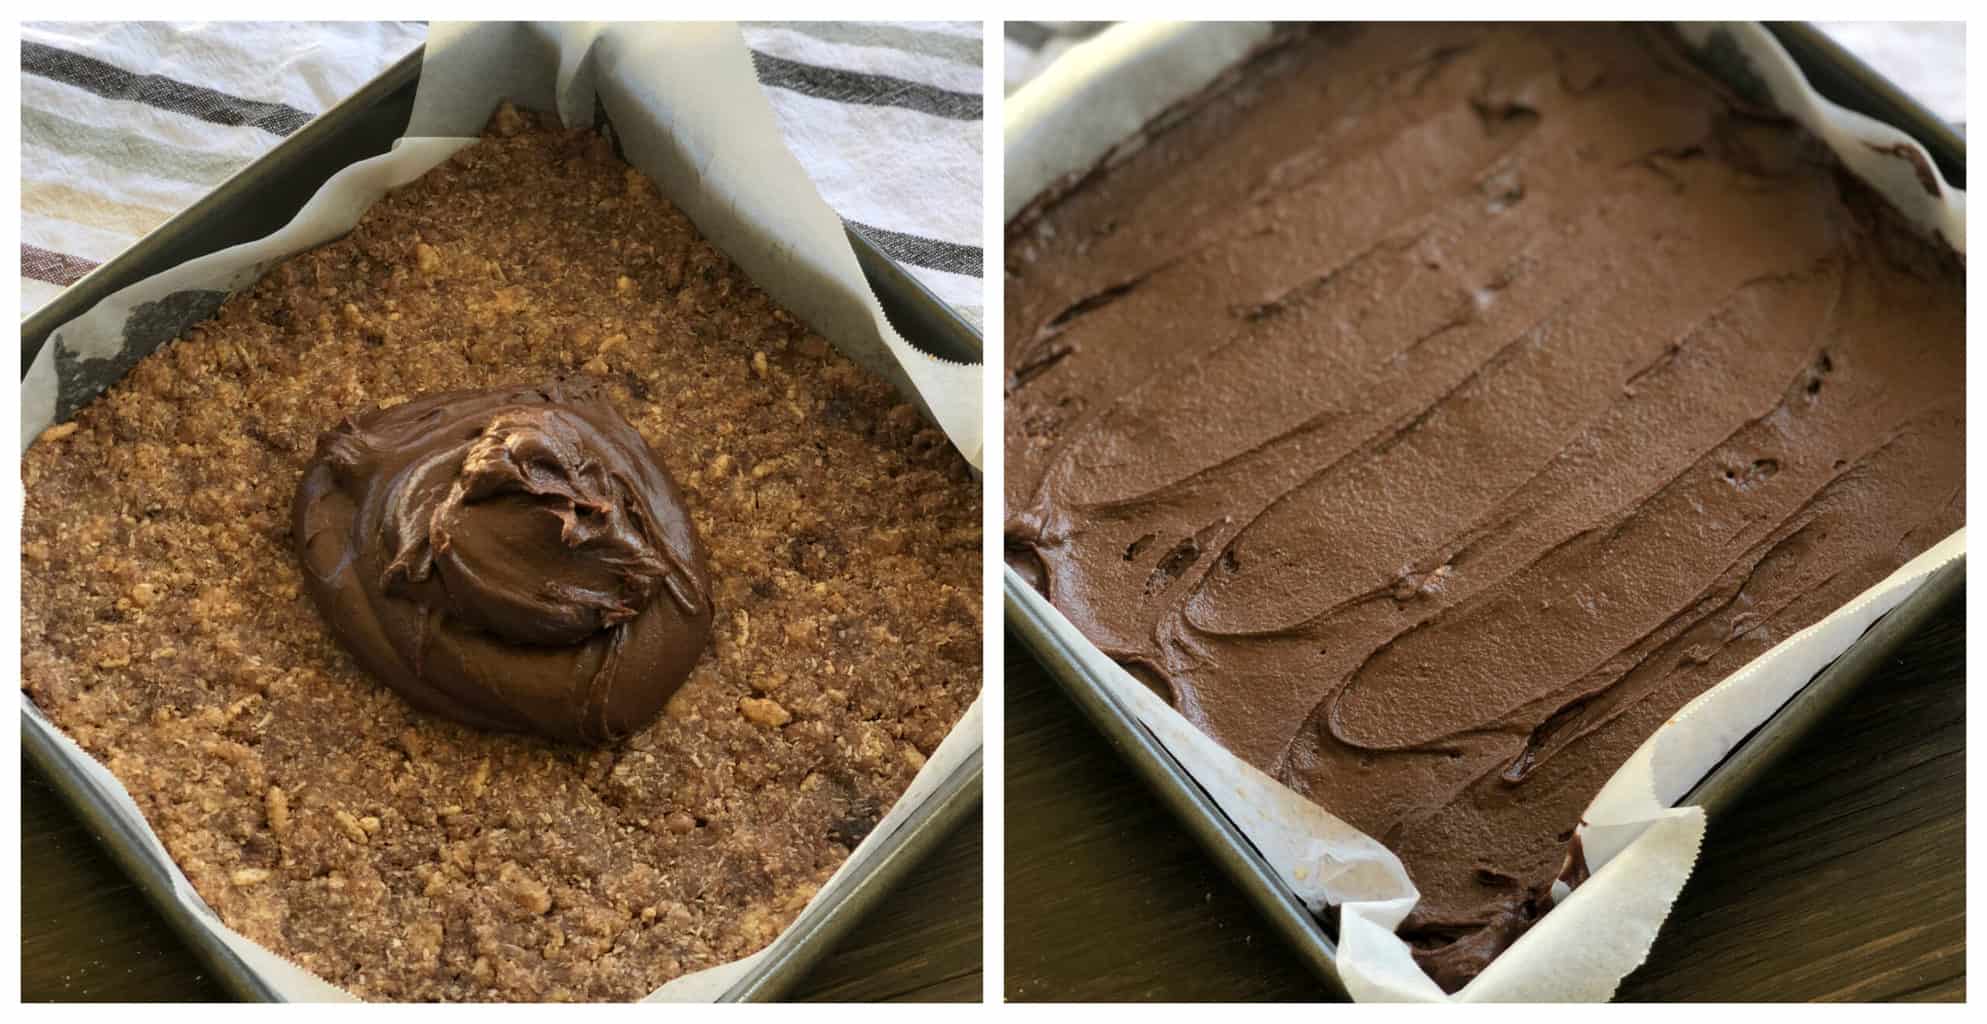 Two photos showing the icing in a pile on the base and the other with the icing spread over the baked slice